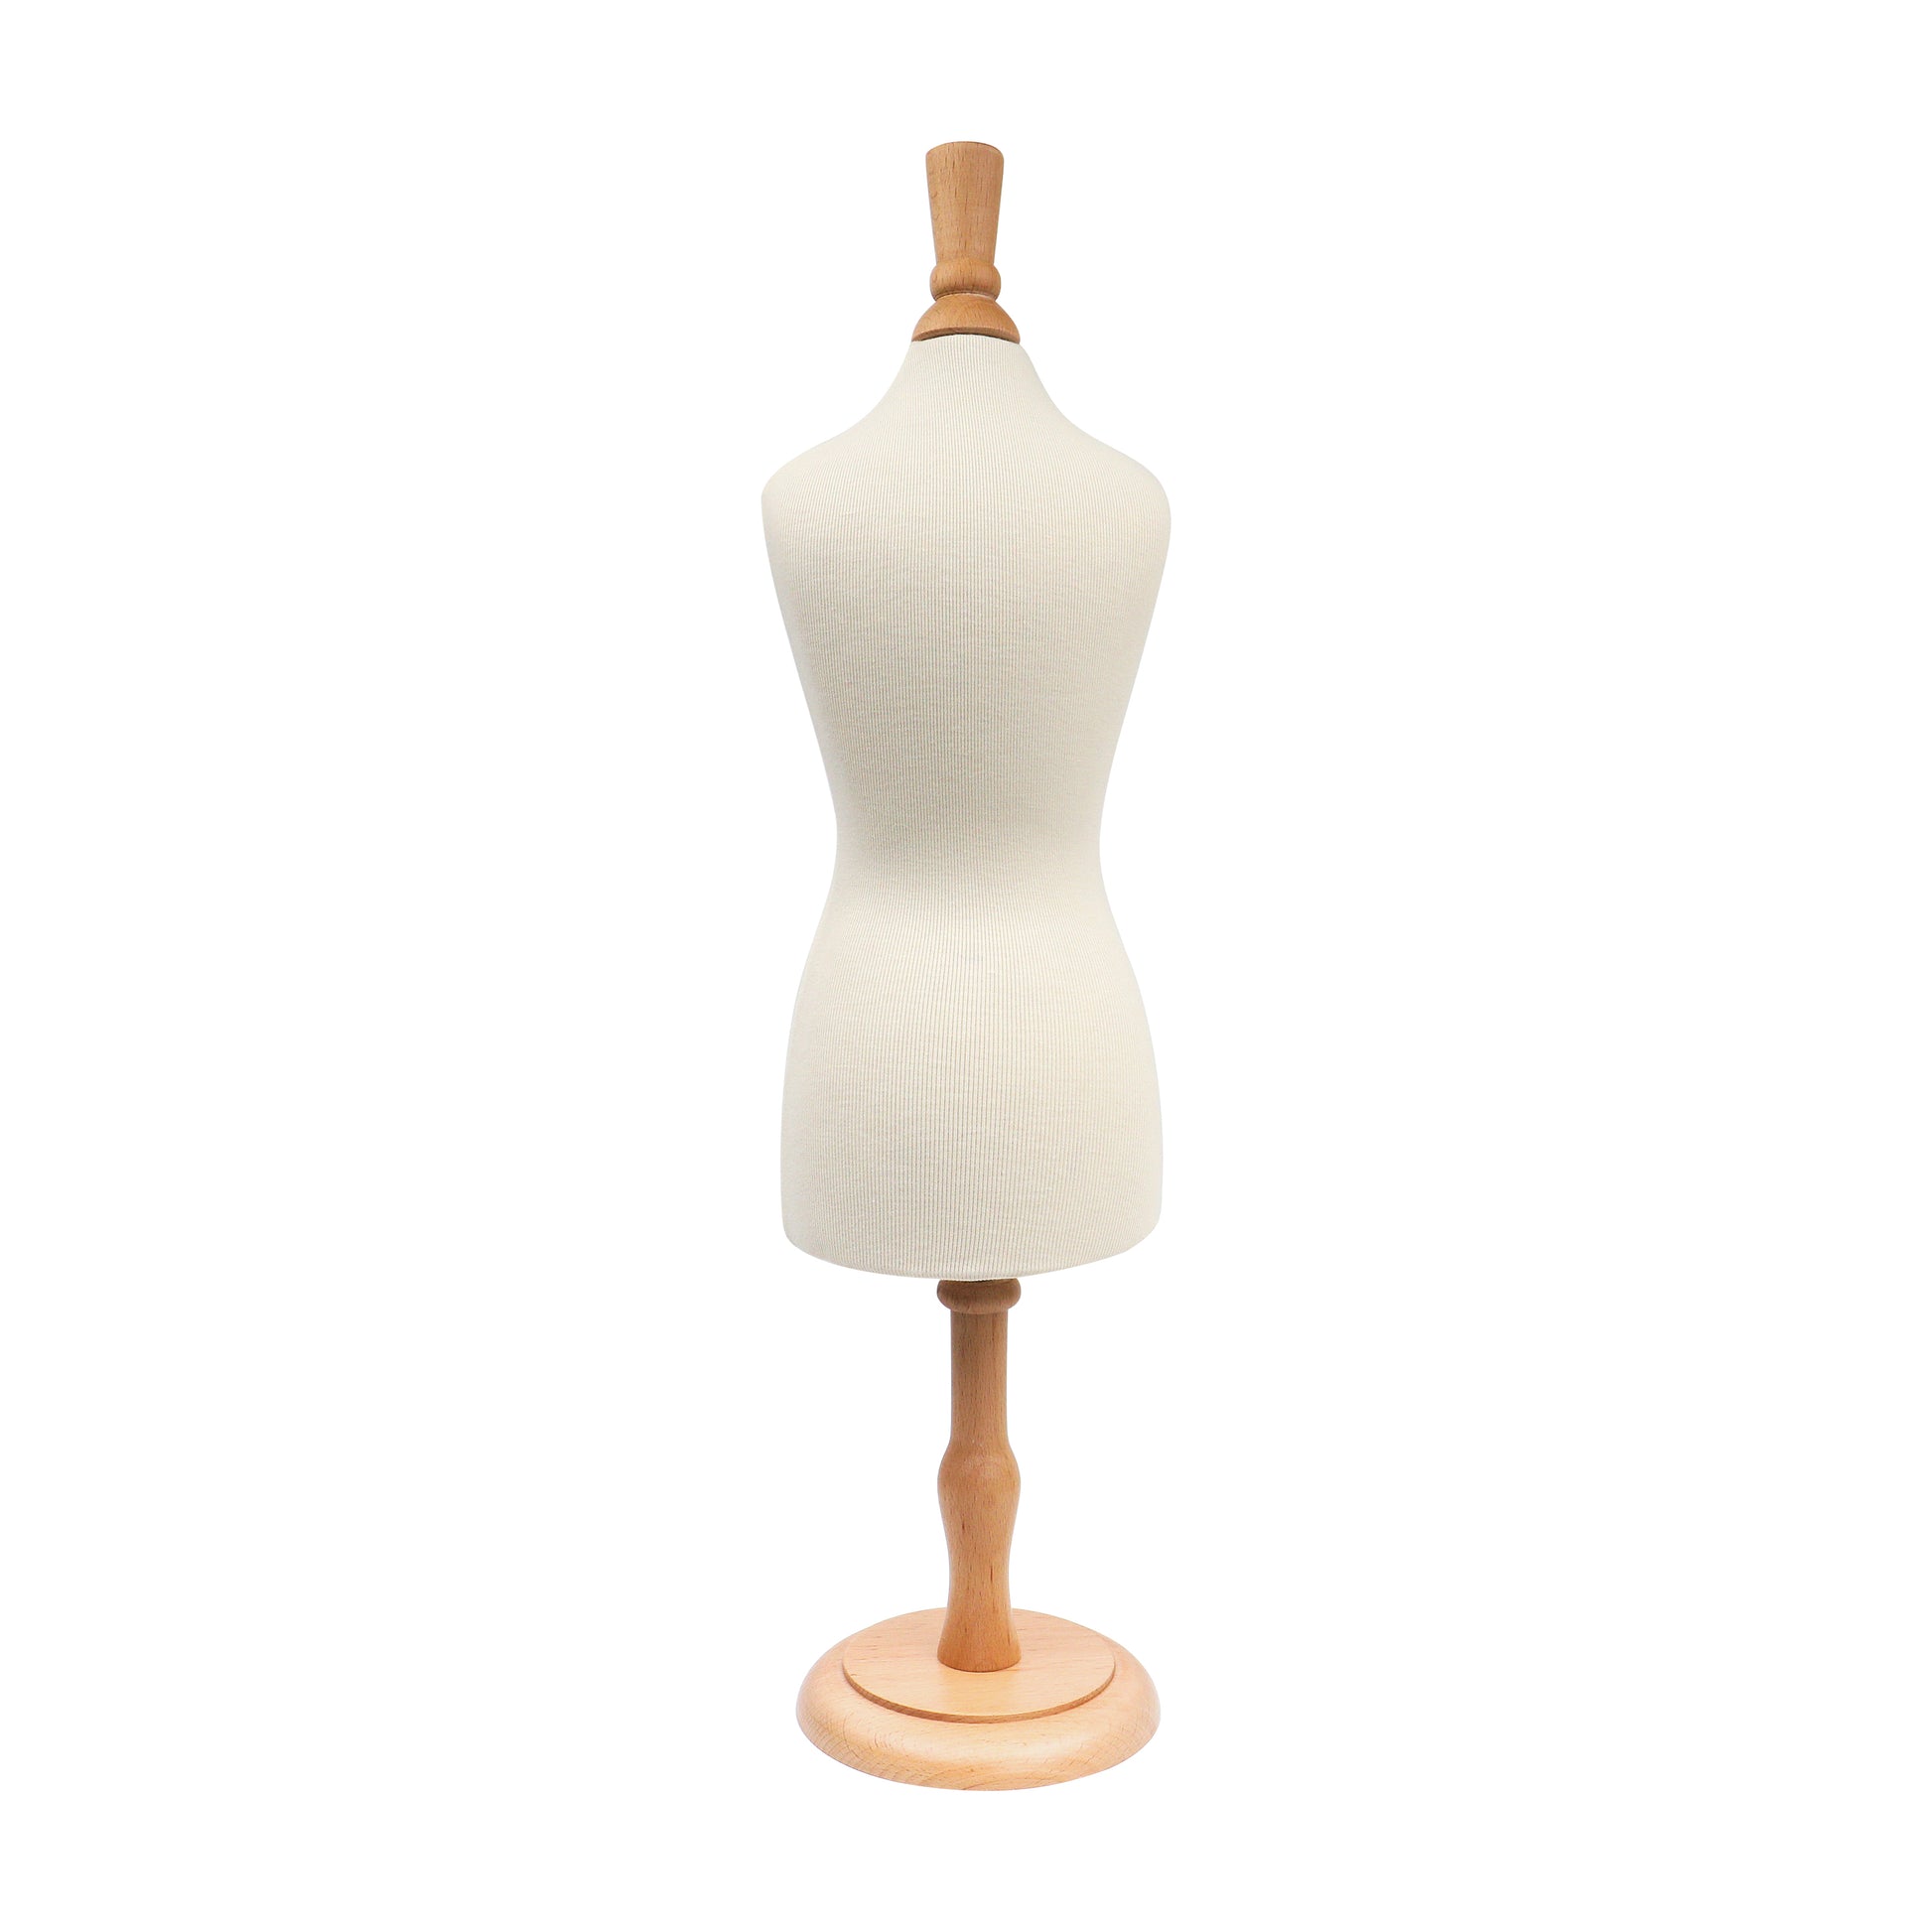 DE-LIANG Clearance Sales half scale mini dress form mannequin for sewing, clothing female torso mannequin, dressmaker dummy fully pin foam pattern DE-LIANG